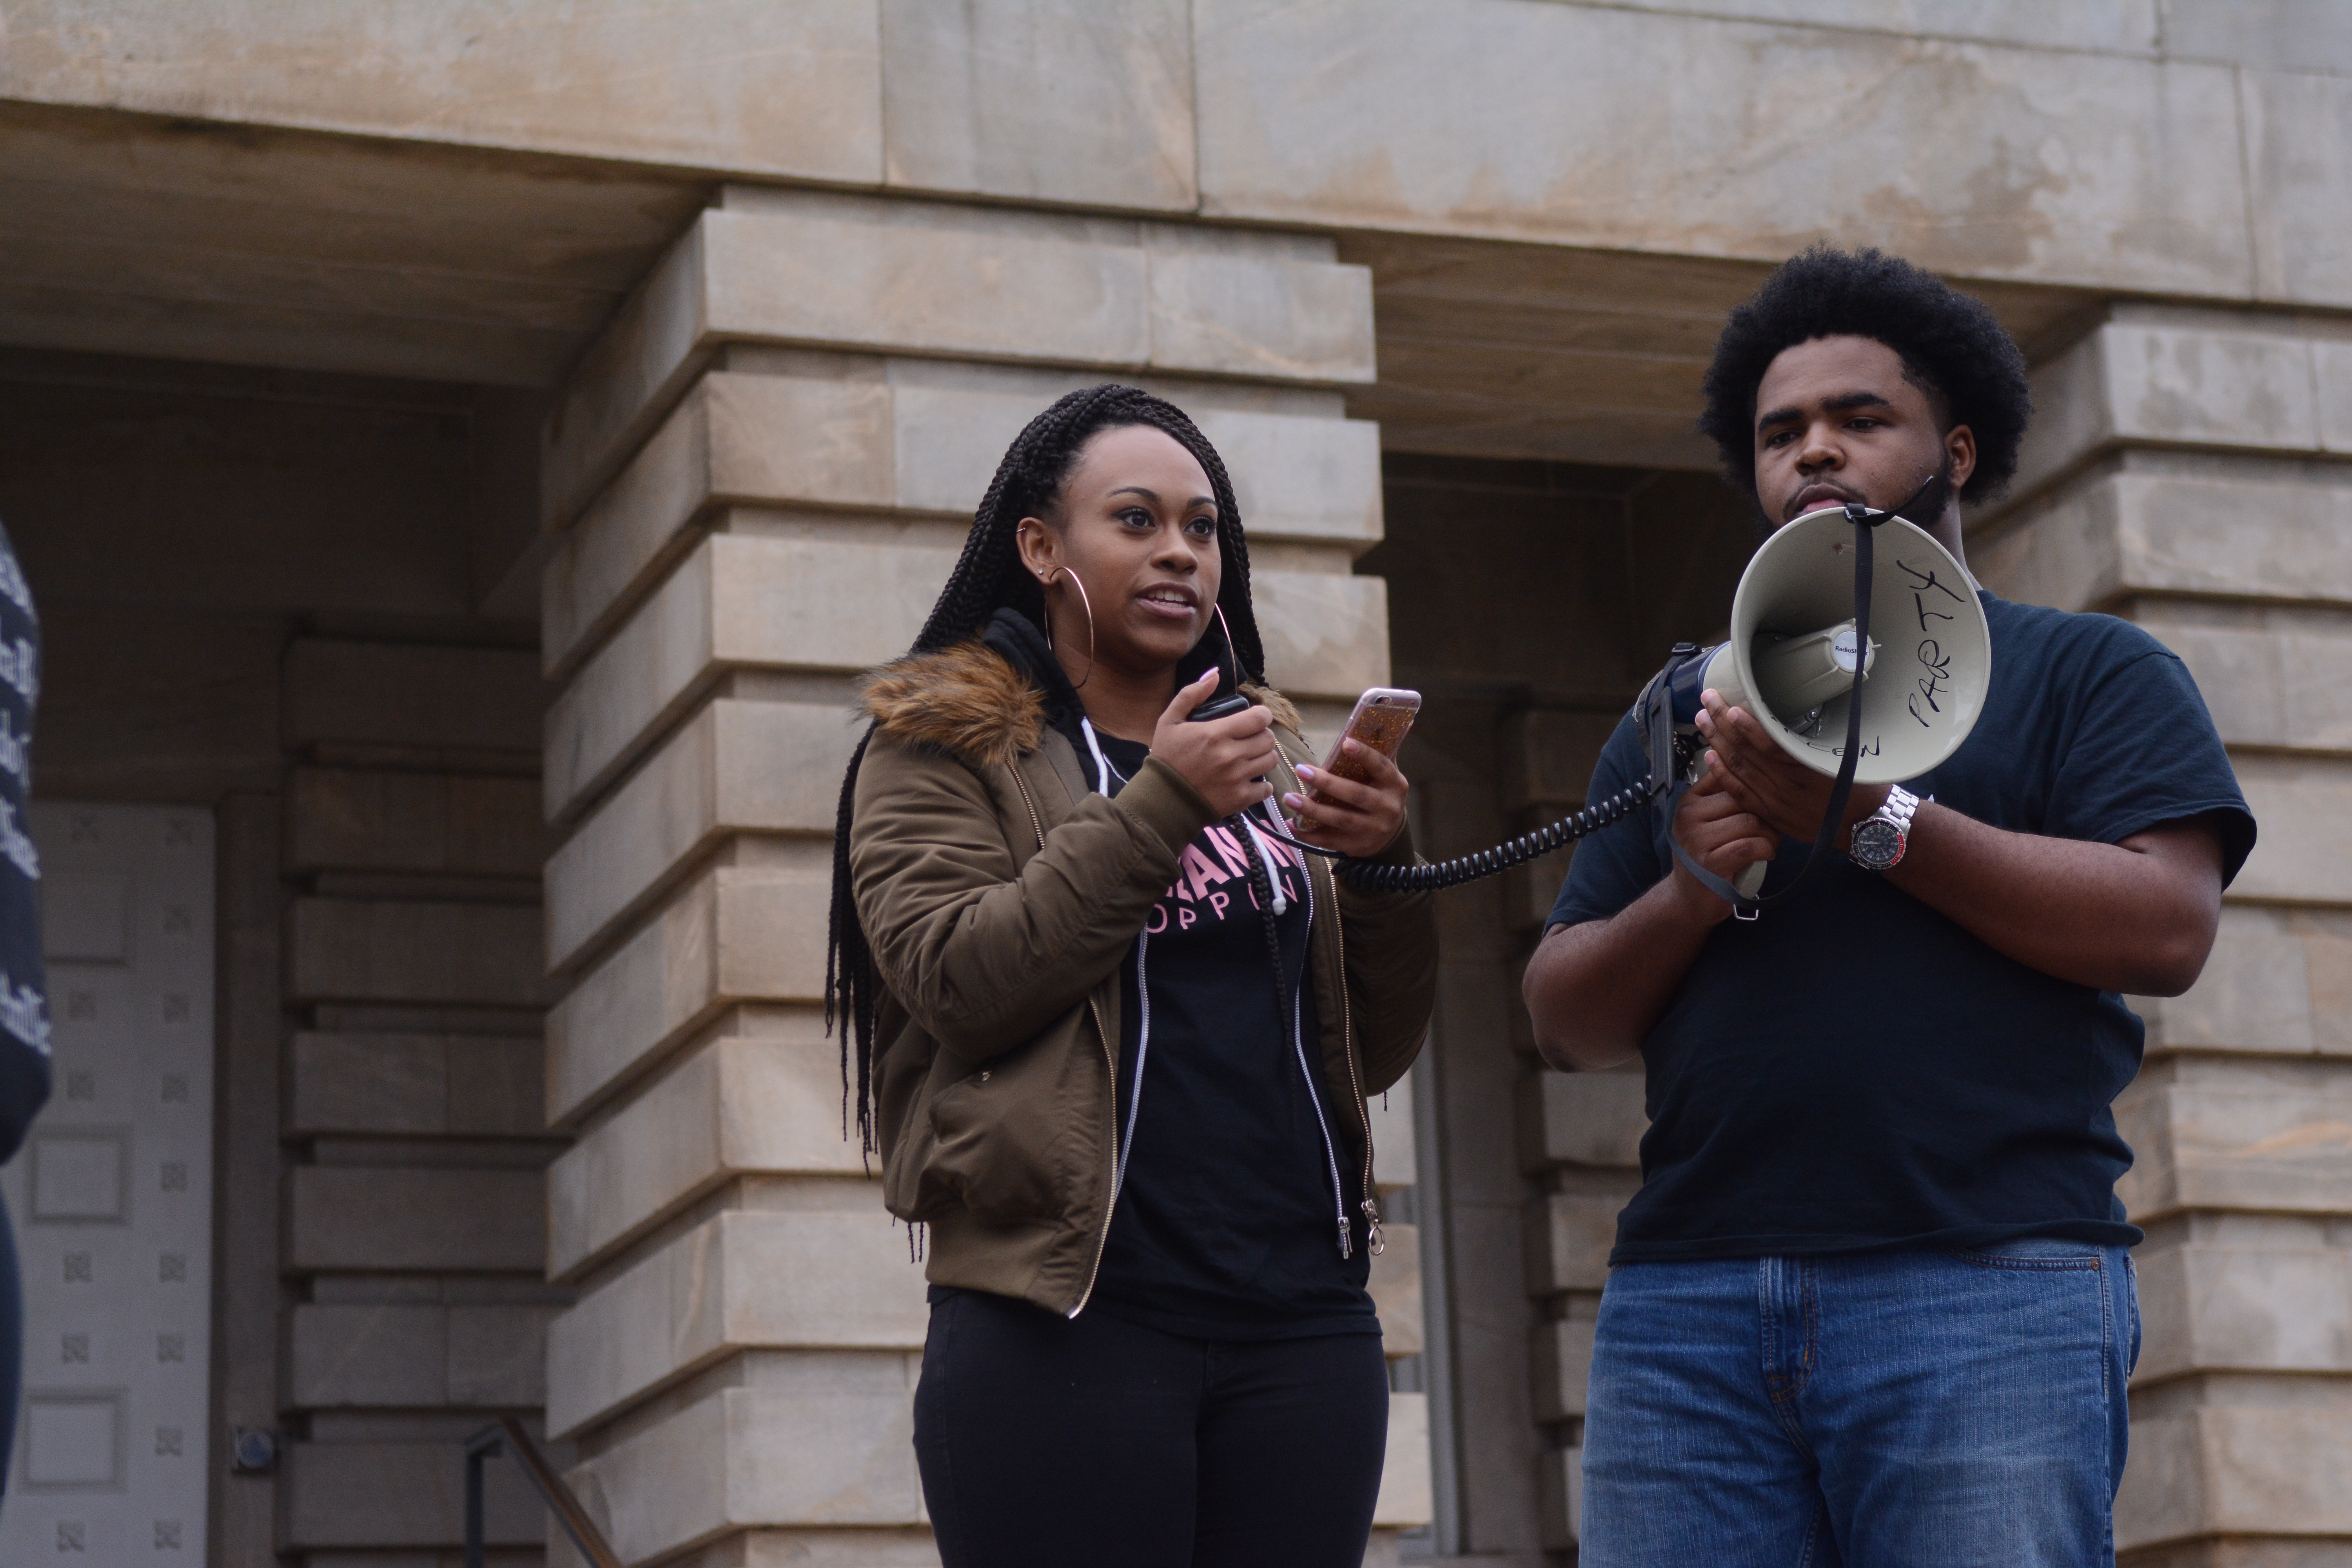 As part of the ReclaimMLK March at Raleigh on Jan. 16, 2017, Achaia Dent, a sophomore studying animal science, speaks in front of the North Carolina State Capitol building. Dent emphasized the legacy of Dr. Martin Luther King Jr. in her words, reading some of Dr. King's famous "I Have a Dream" speech, and urged the crowd to continue being active to fix issues minorities face.